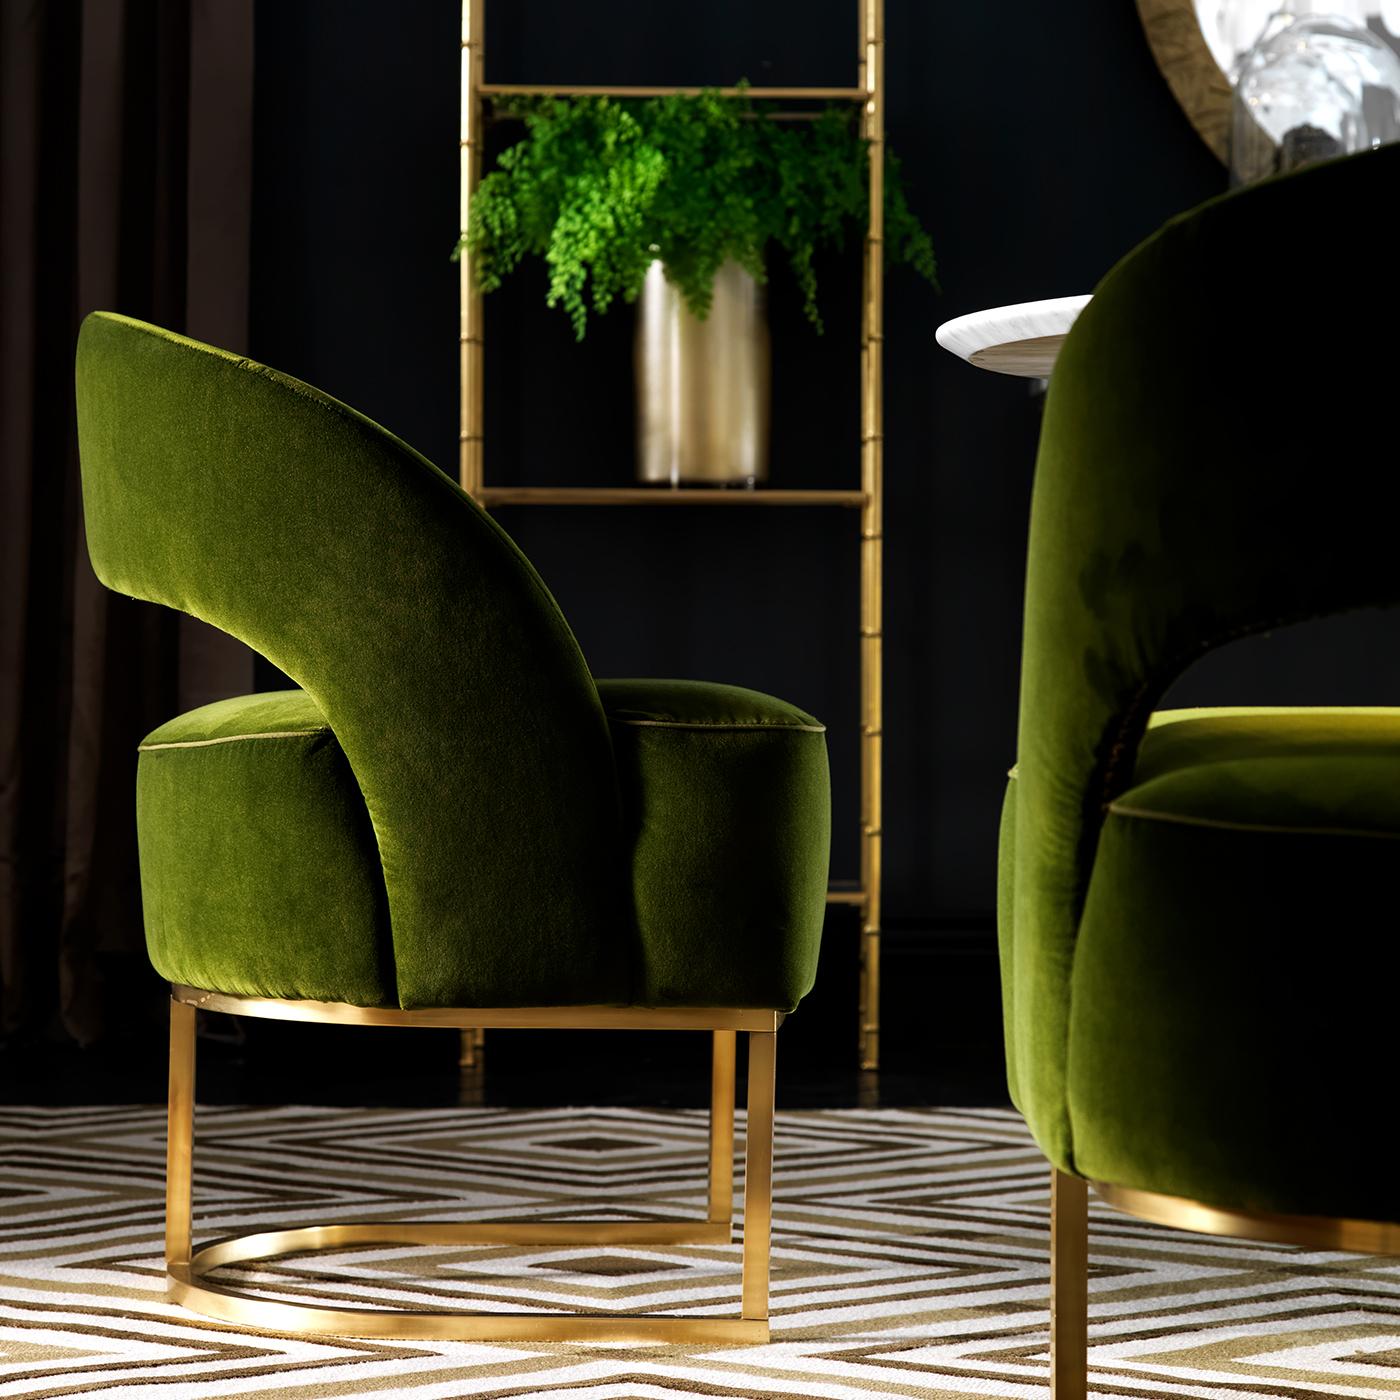 A superb object of functional decor, this armchair is comfortable and striking. Its sinuous silhouette, combining a light base, a cut-out backrest, and a thick seat cushion, is visually imposing and will make a statement in a modern interior, thanks